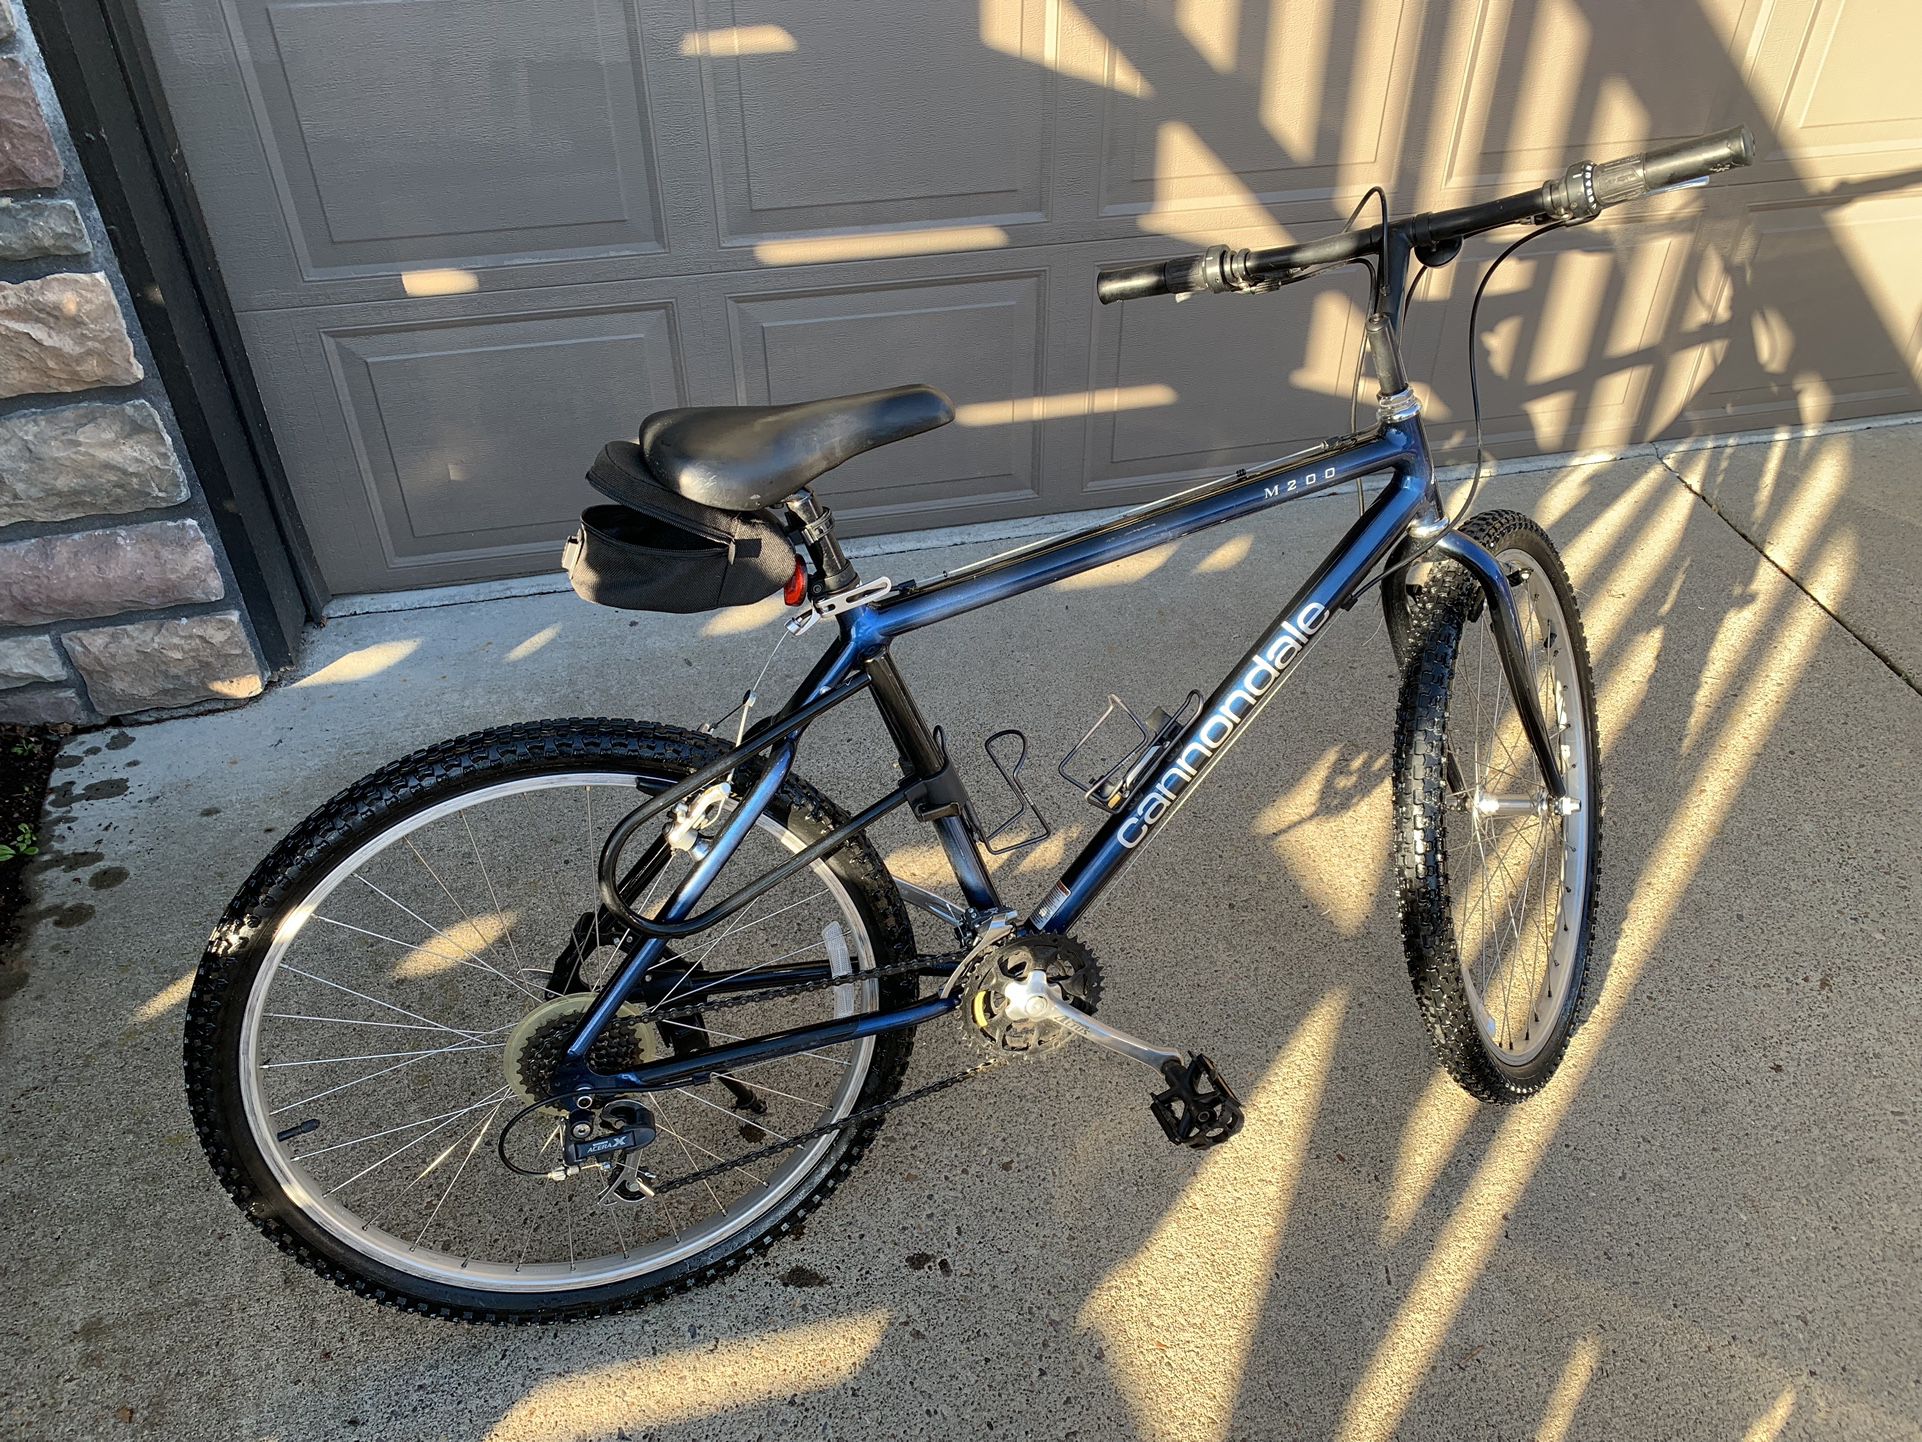 MAKE AN OFFER The Hub Needs To Be Freed Up. We Had Tune Up Done Not Long Ago. Cannondale Mountain Bike Navy Blue